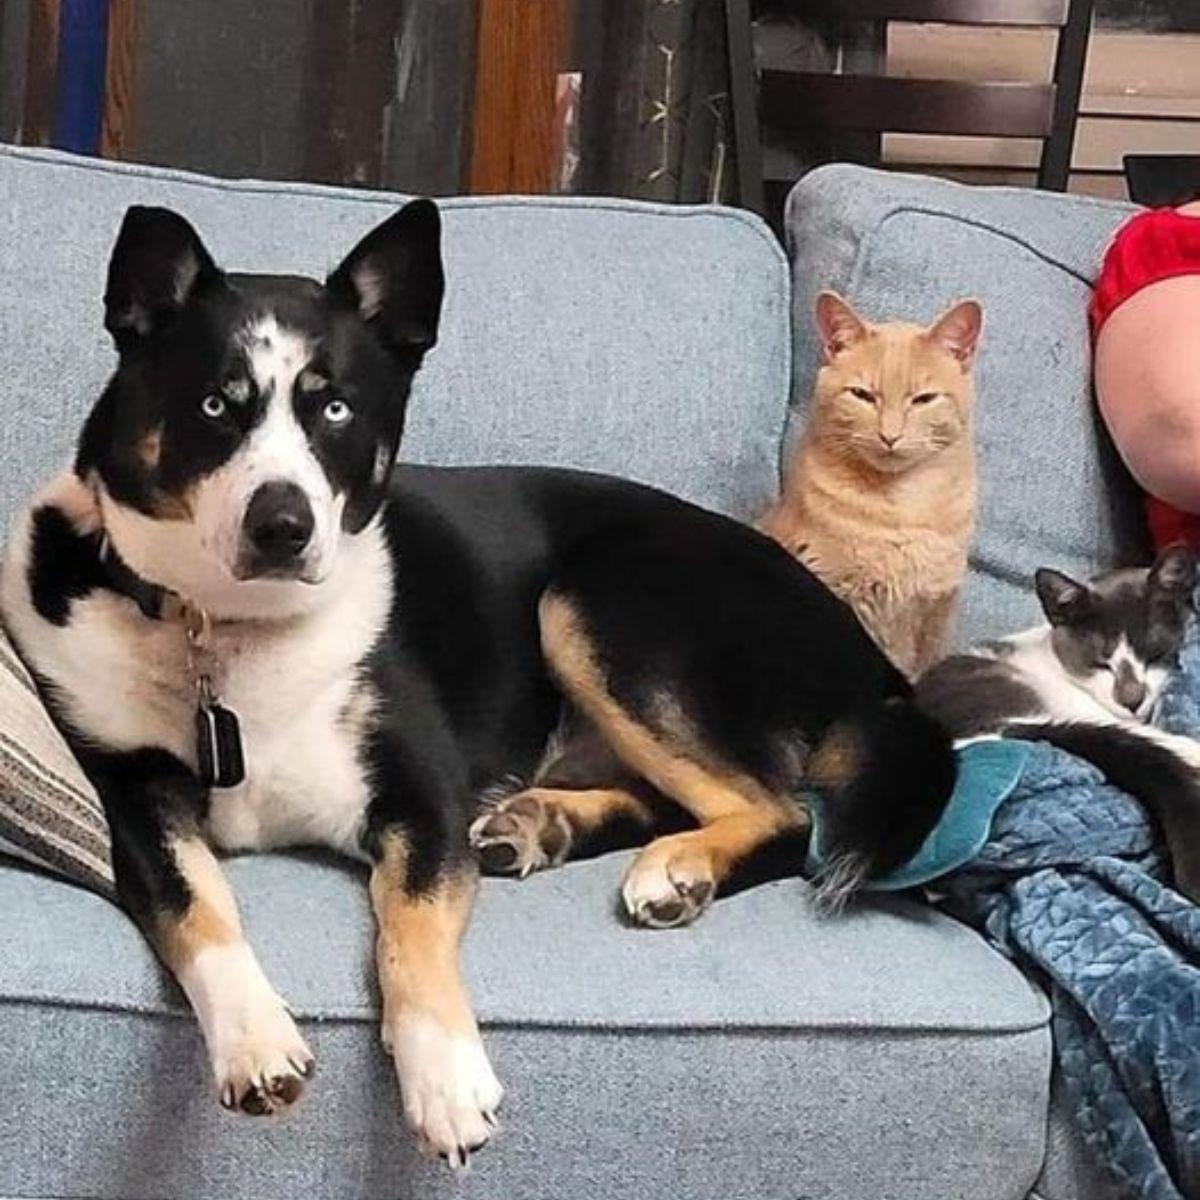 two cats and a dog on a couch